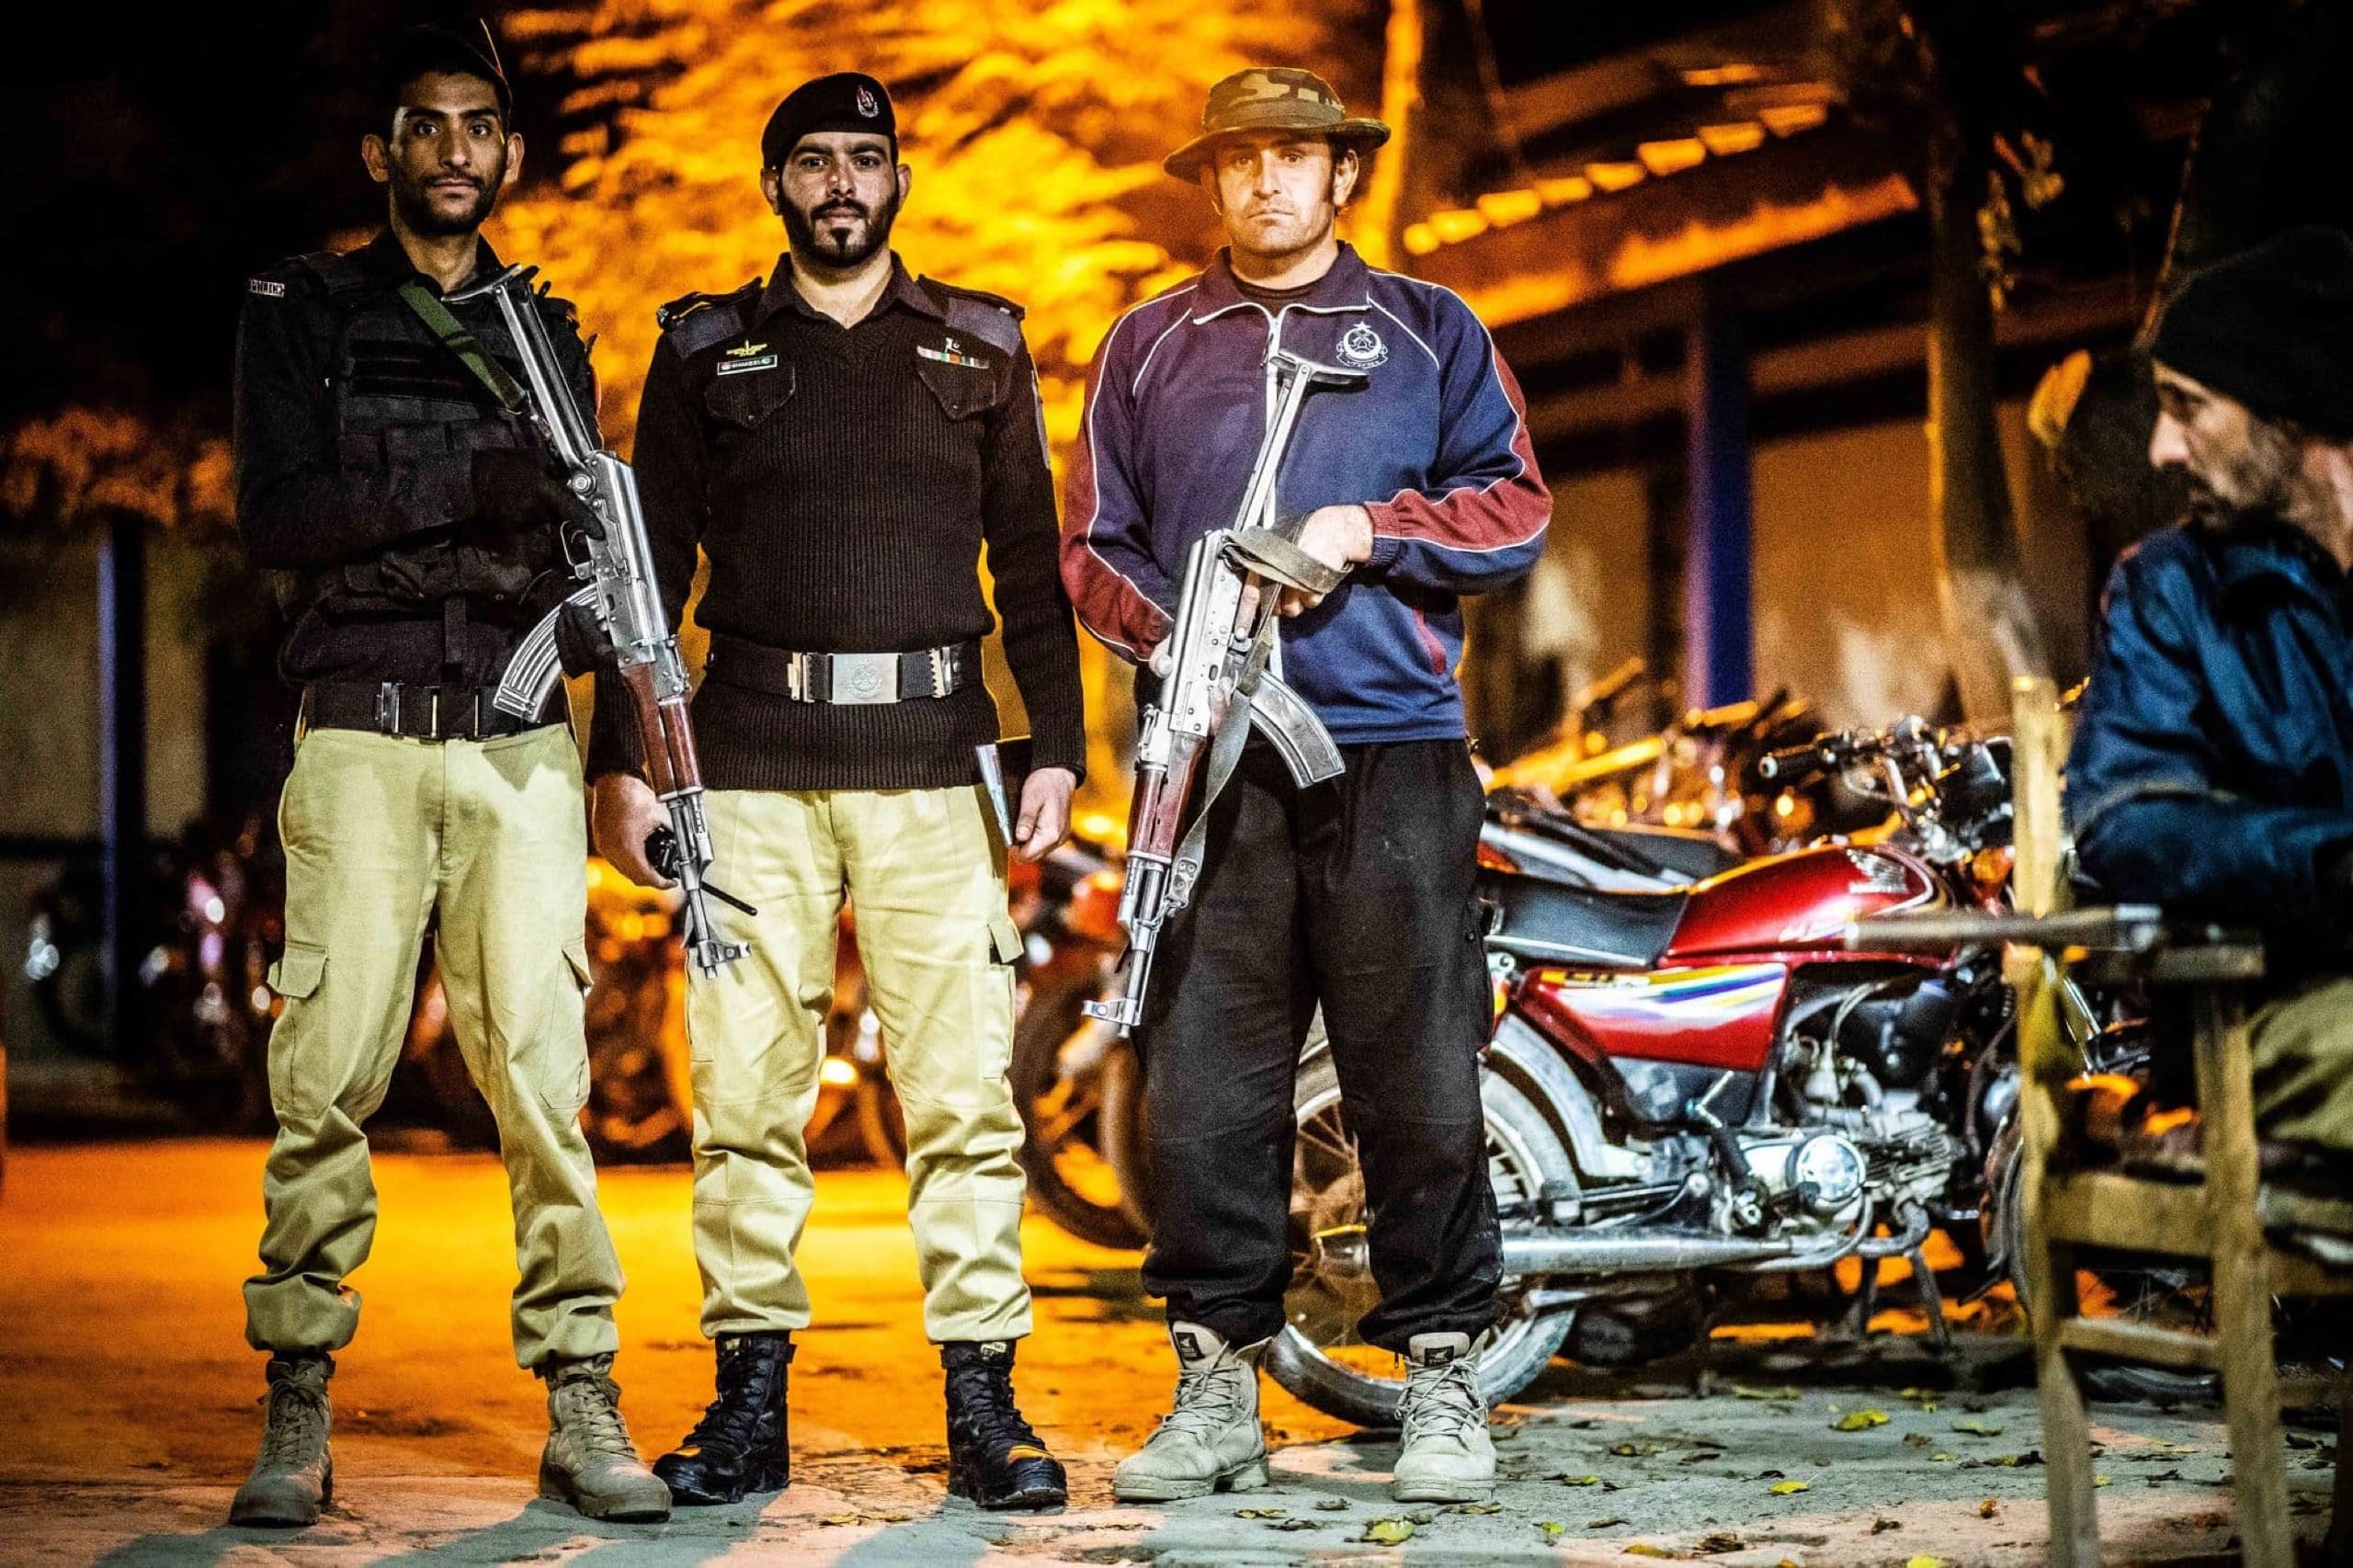 Pakistan, an inside look into the police state